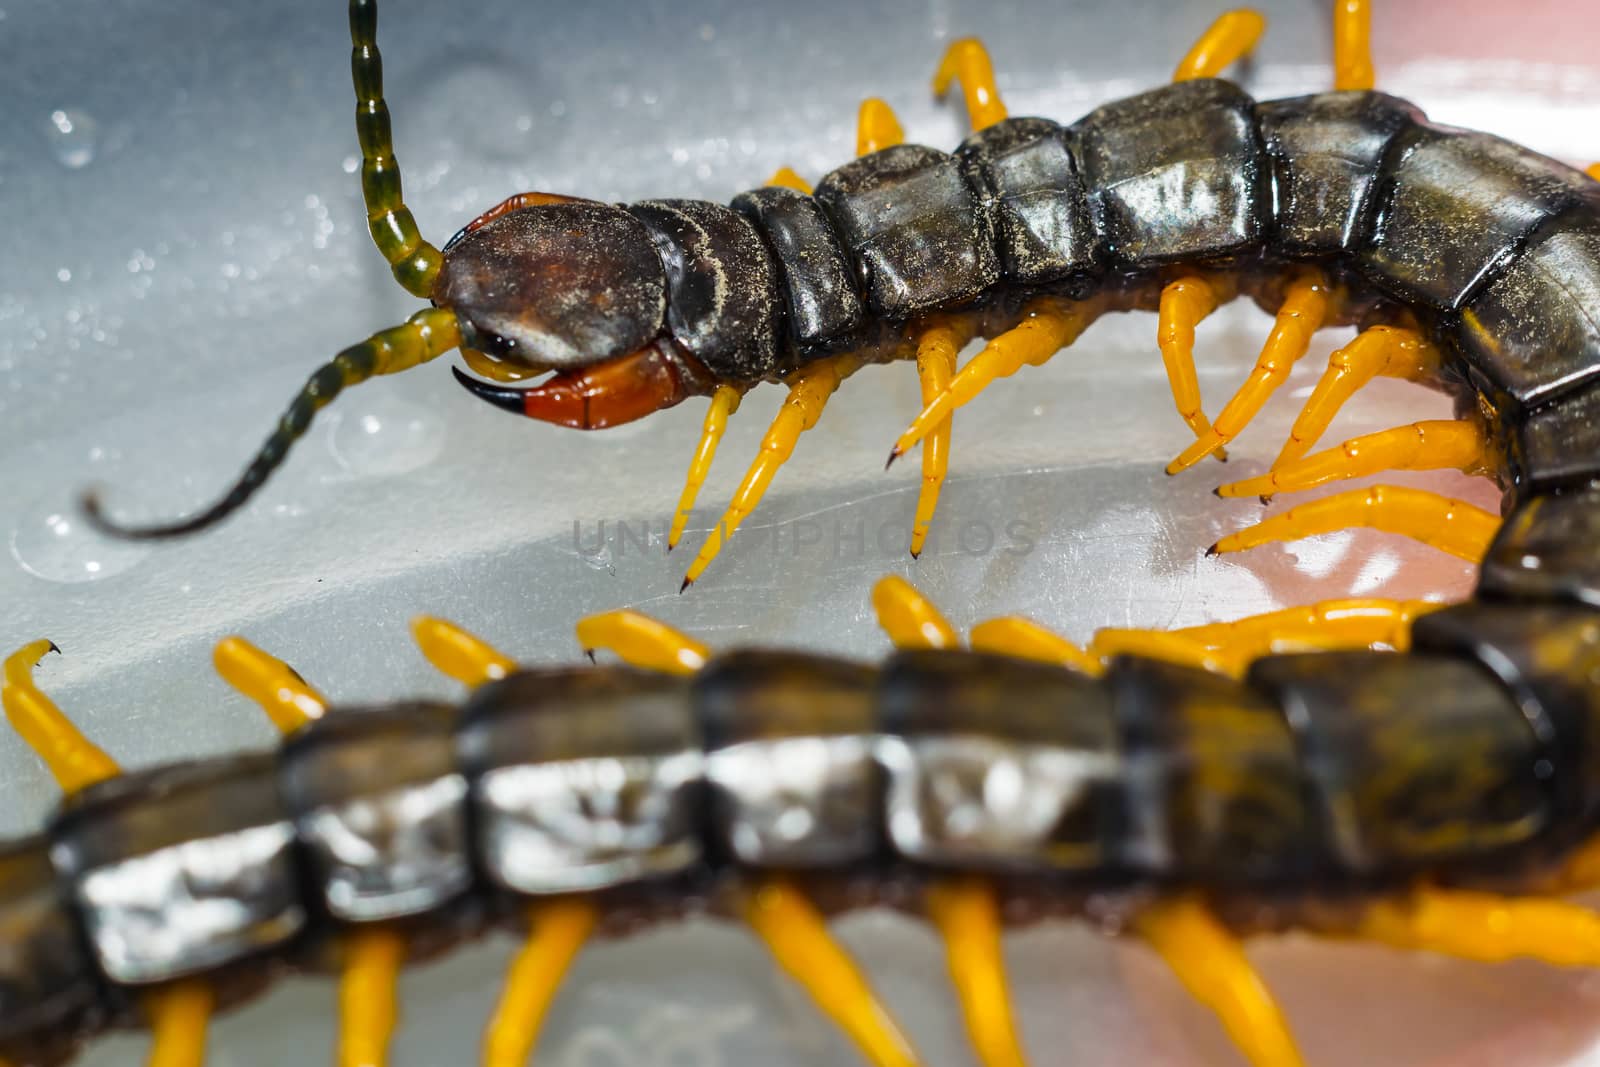 Centipede close up by darksoul72